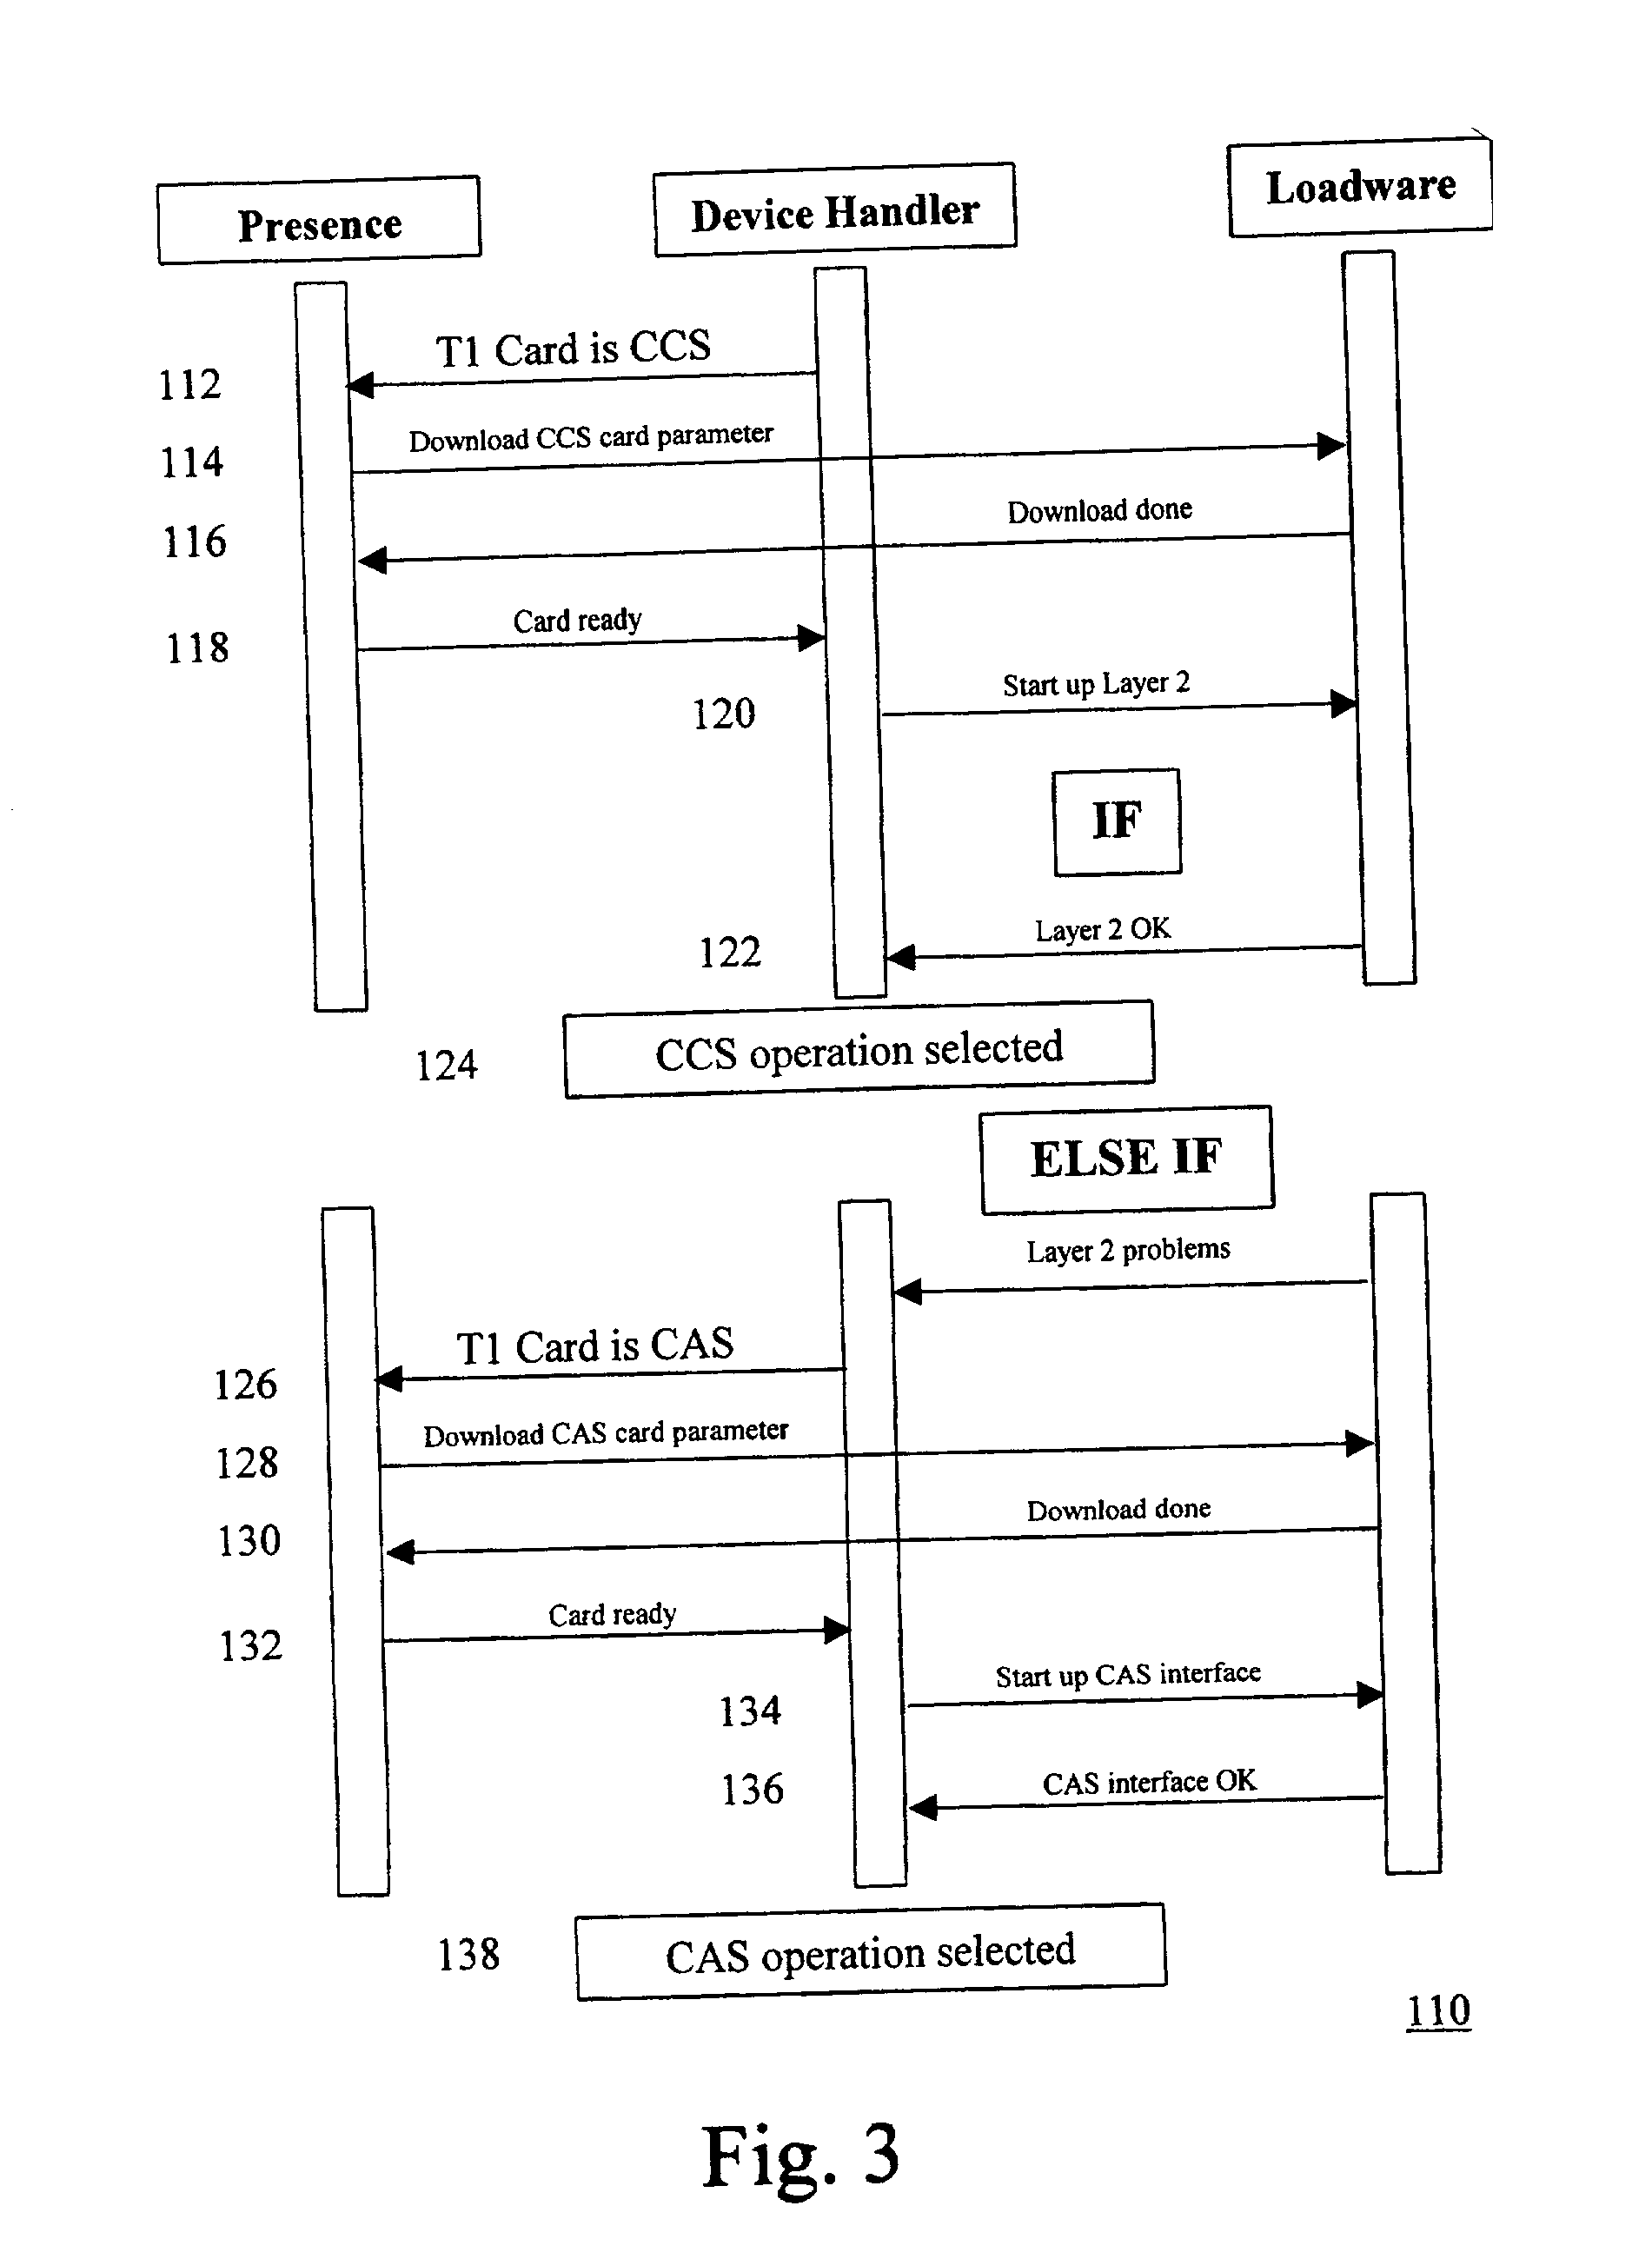 Method of automatic signaling detection for a high speed communications link